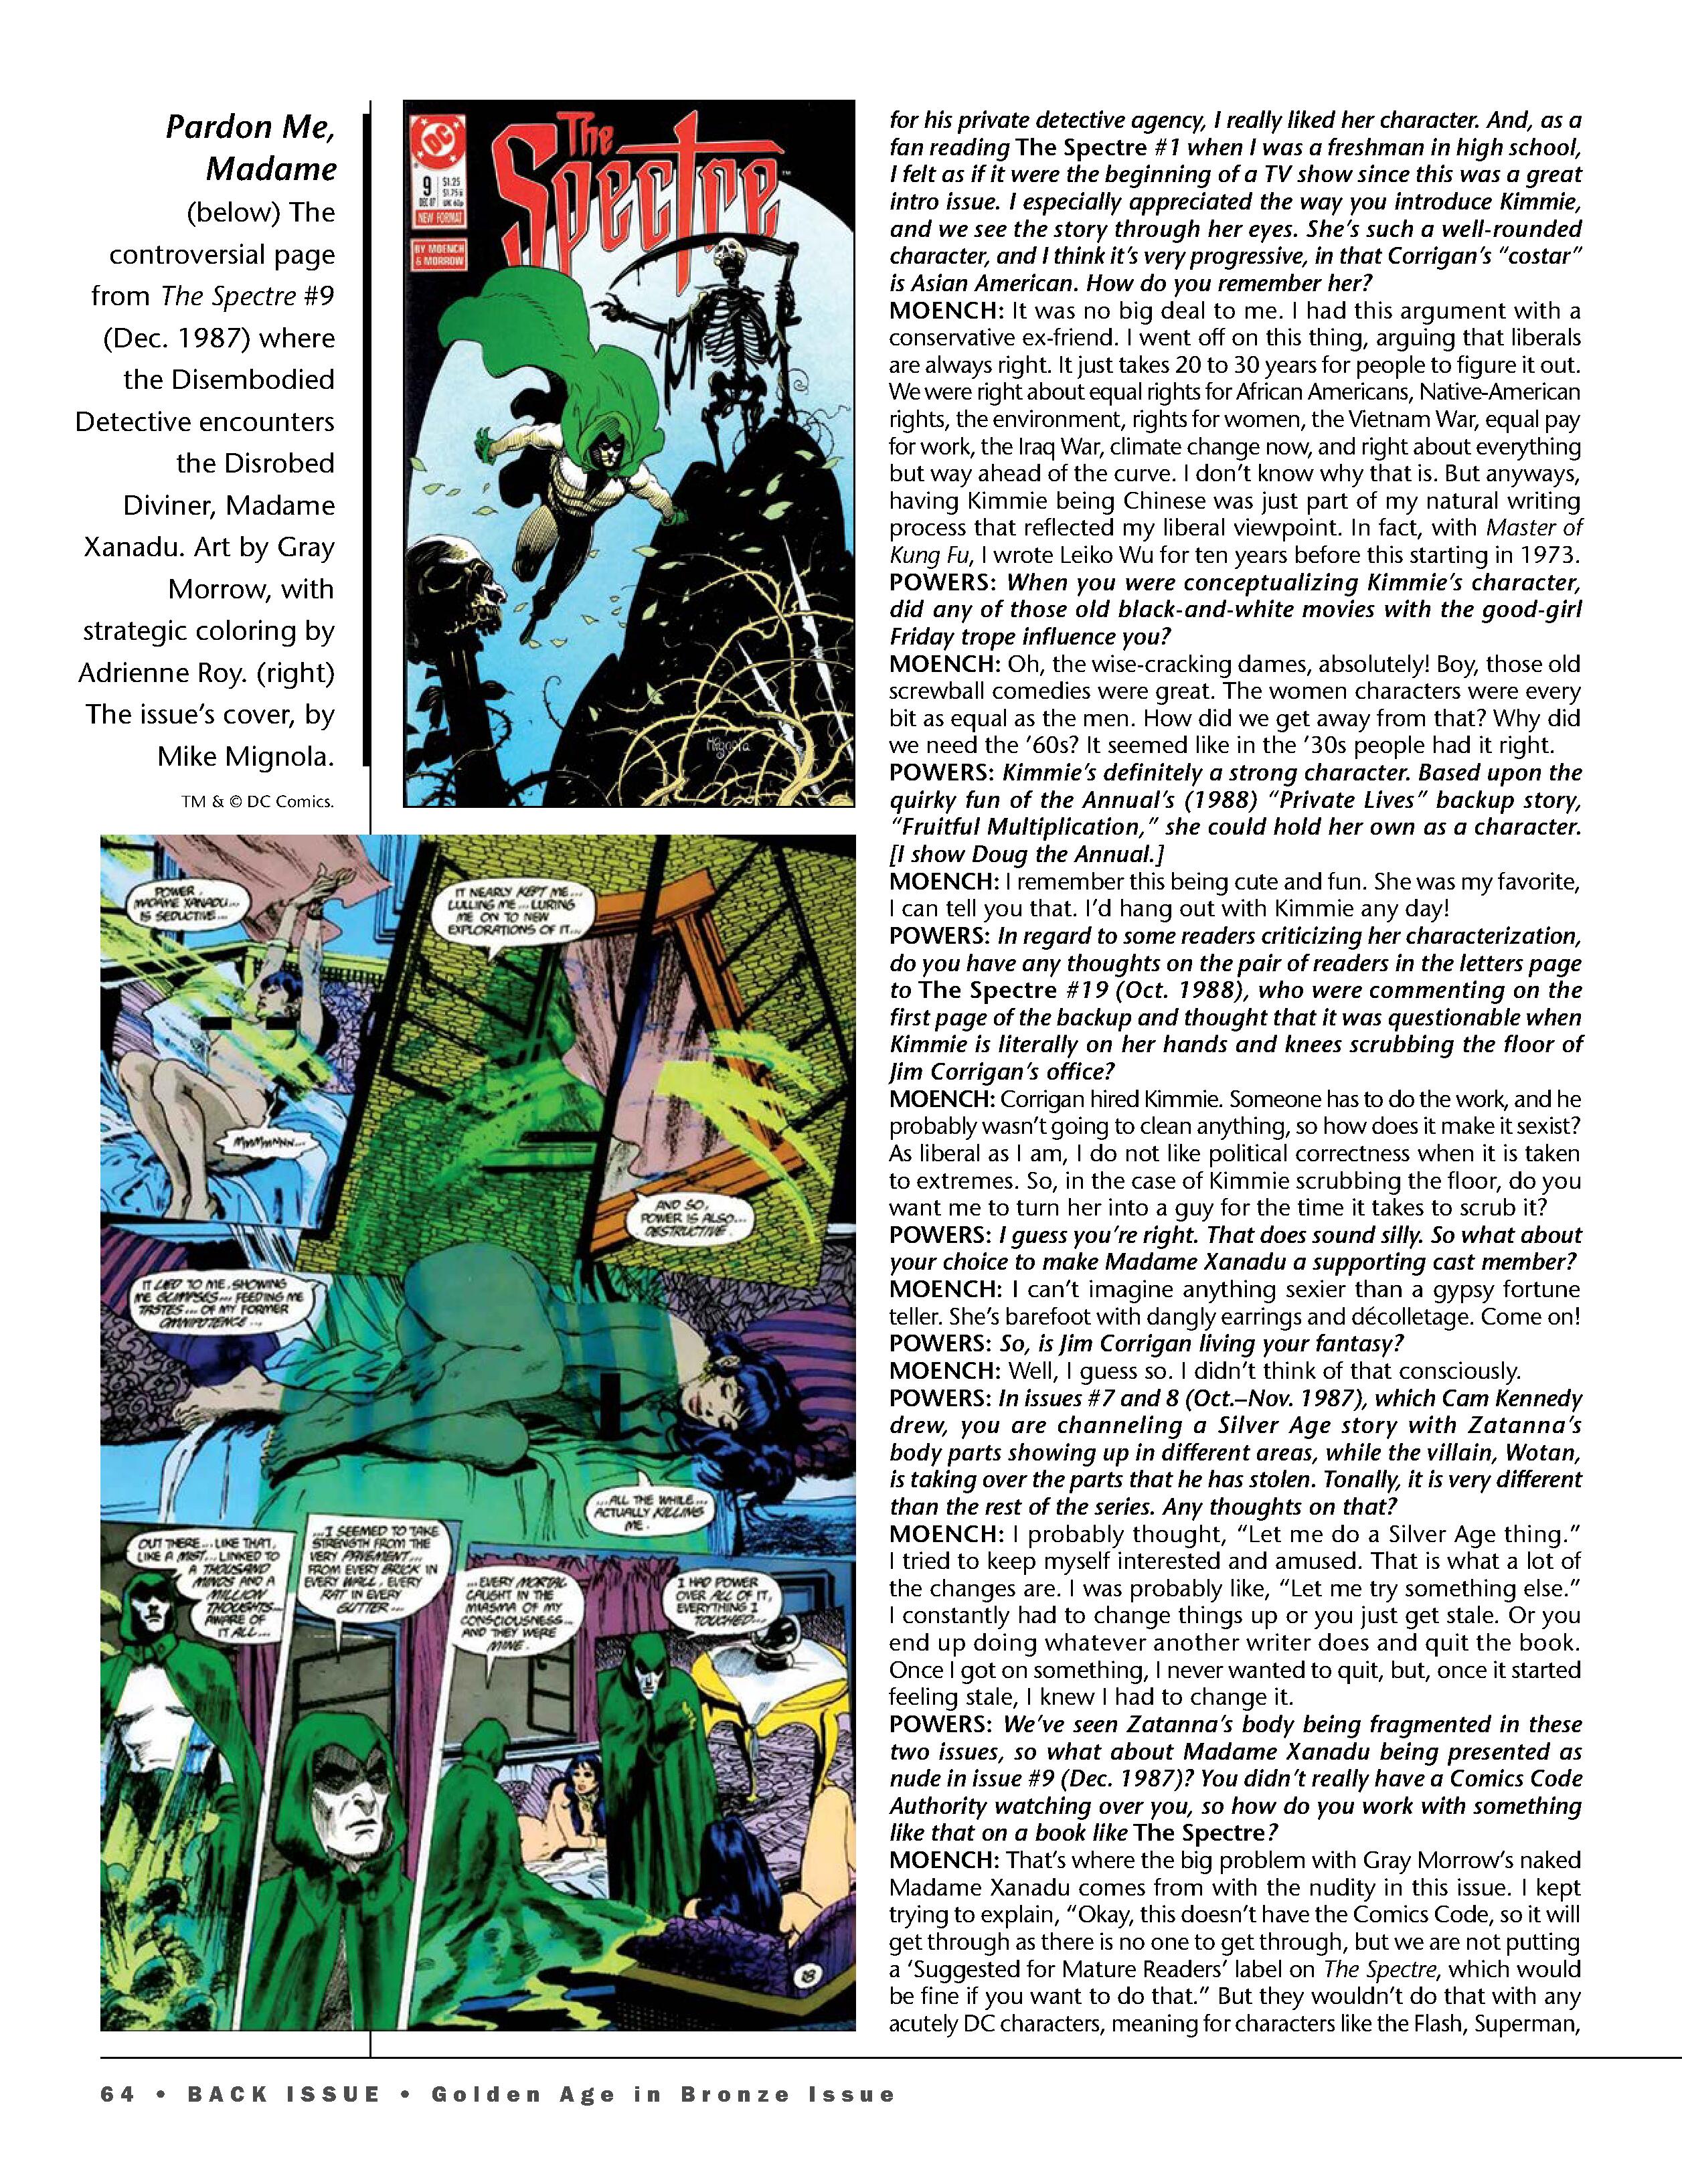 Read online Back Issue comic -  Issue #106 - 66